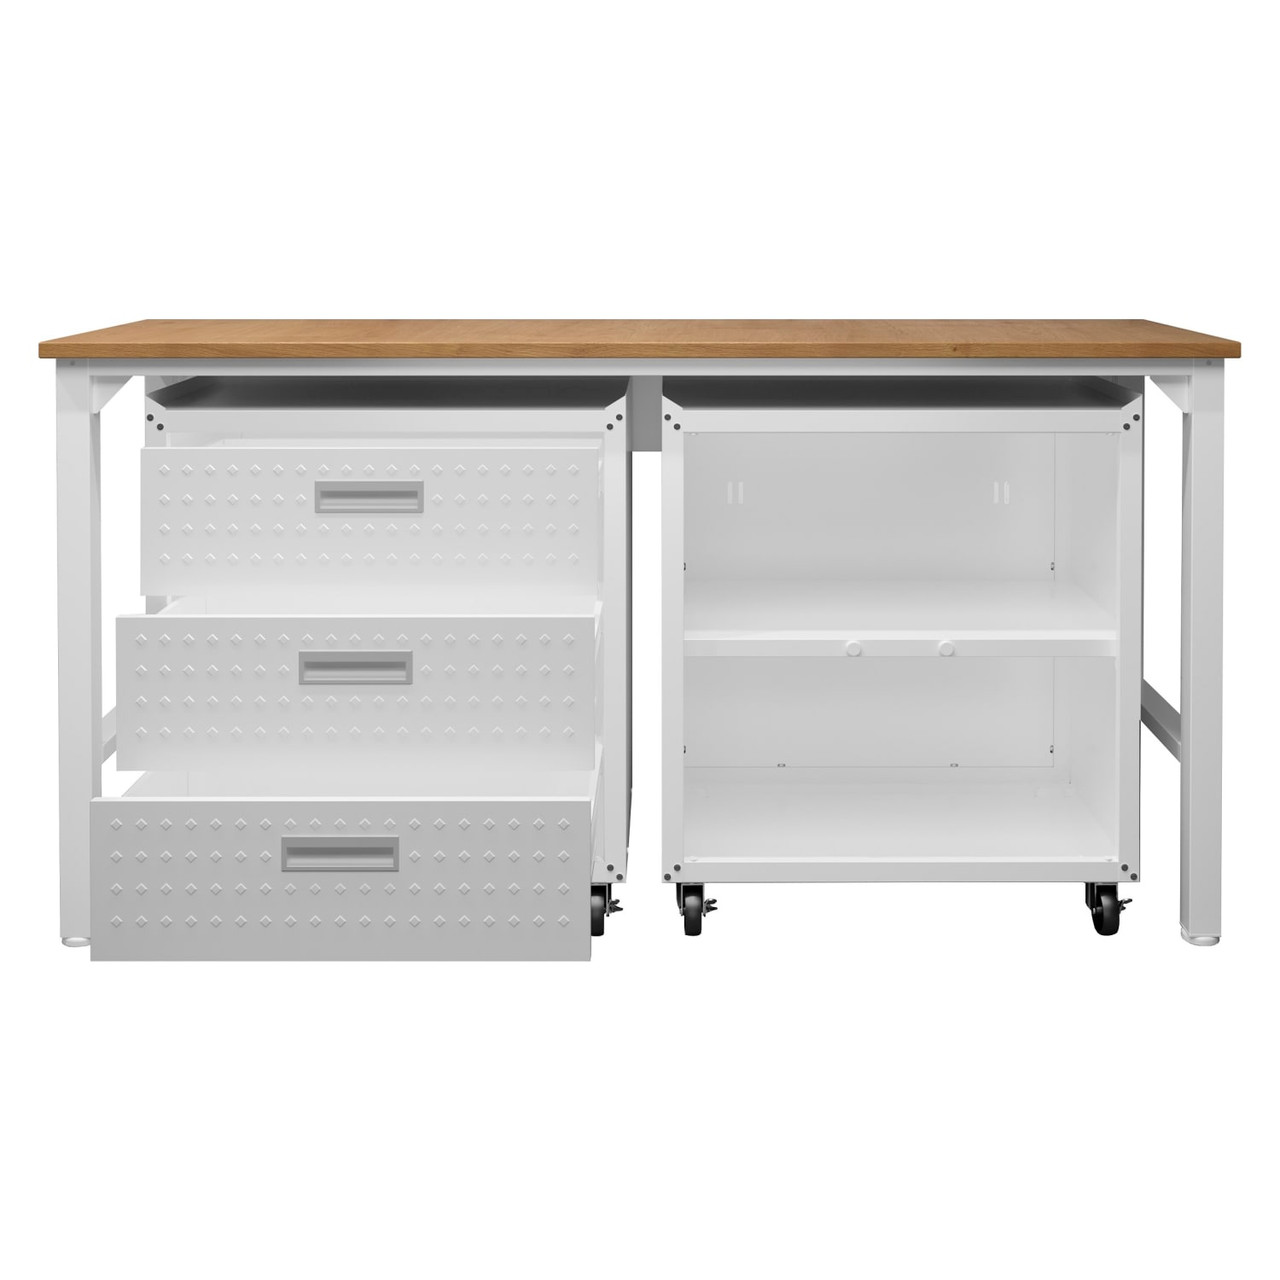 3-Piece Fortress Mobile Space-Saving Steel Garage Cabinet and Worktable 3.0 in White